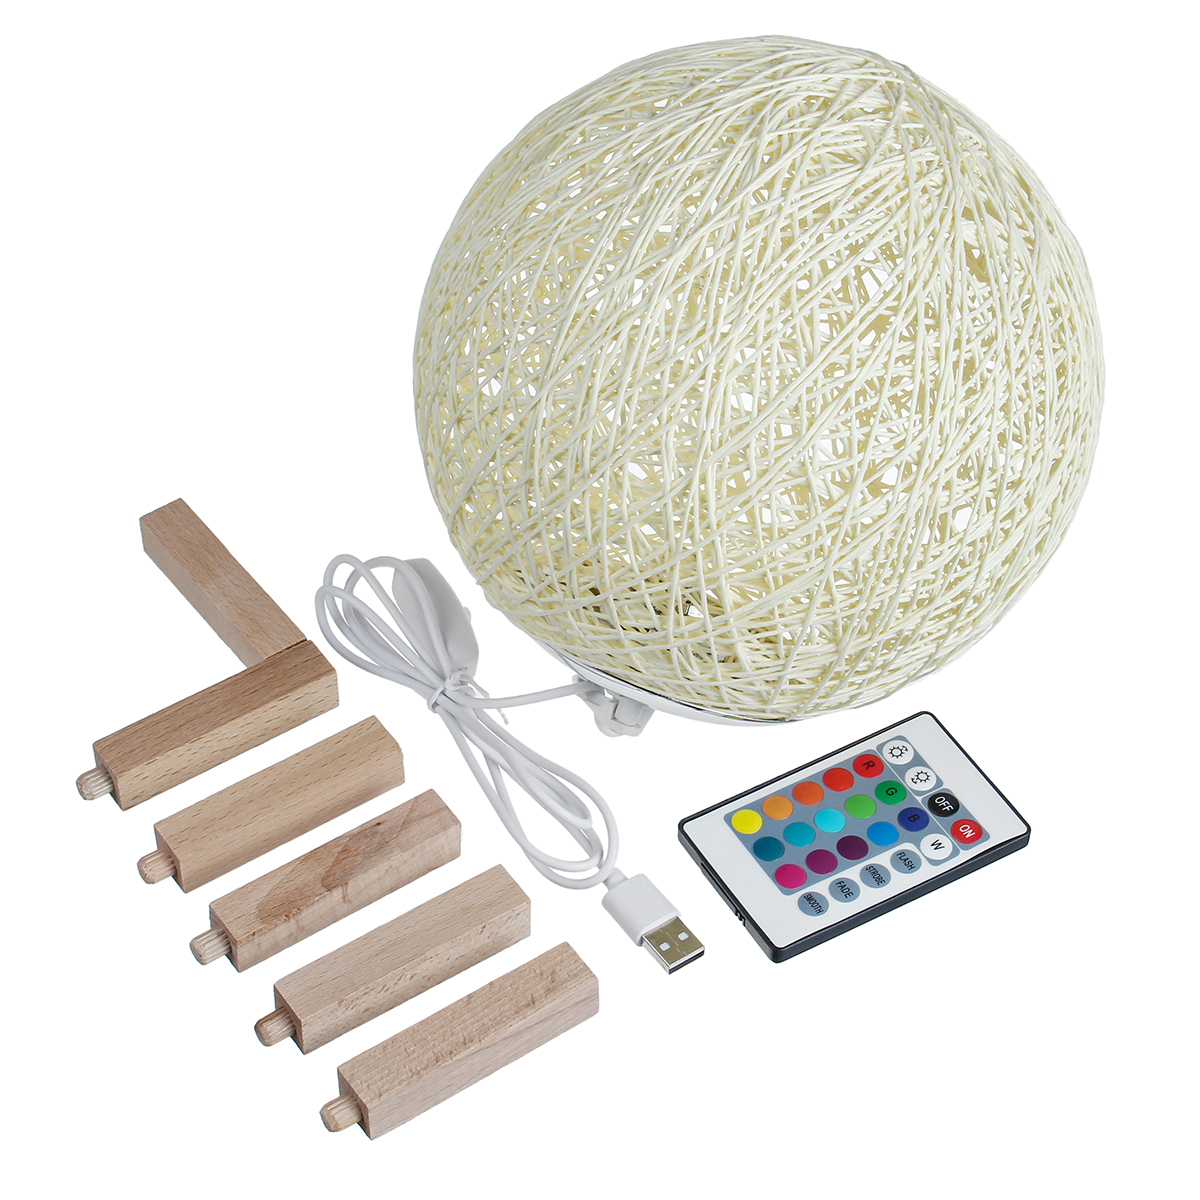 USB-Wooden-Rattan-Table-Light-Dimming-Desk-Bedroom-Night-LED-Ball-Home-Decorations-1627078-10